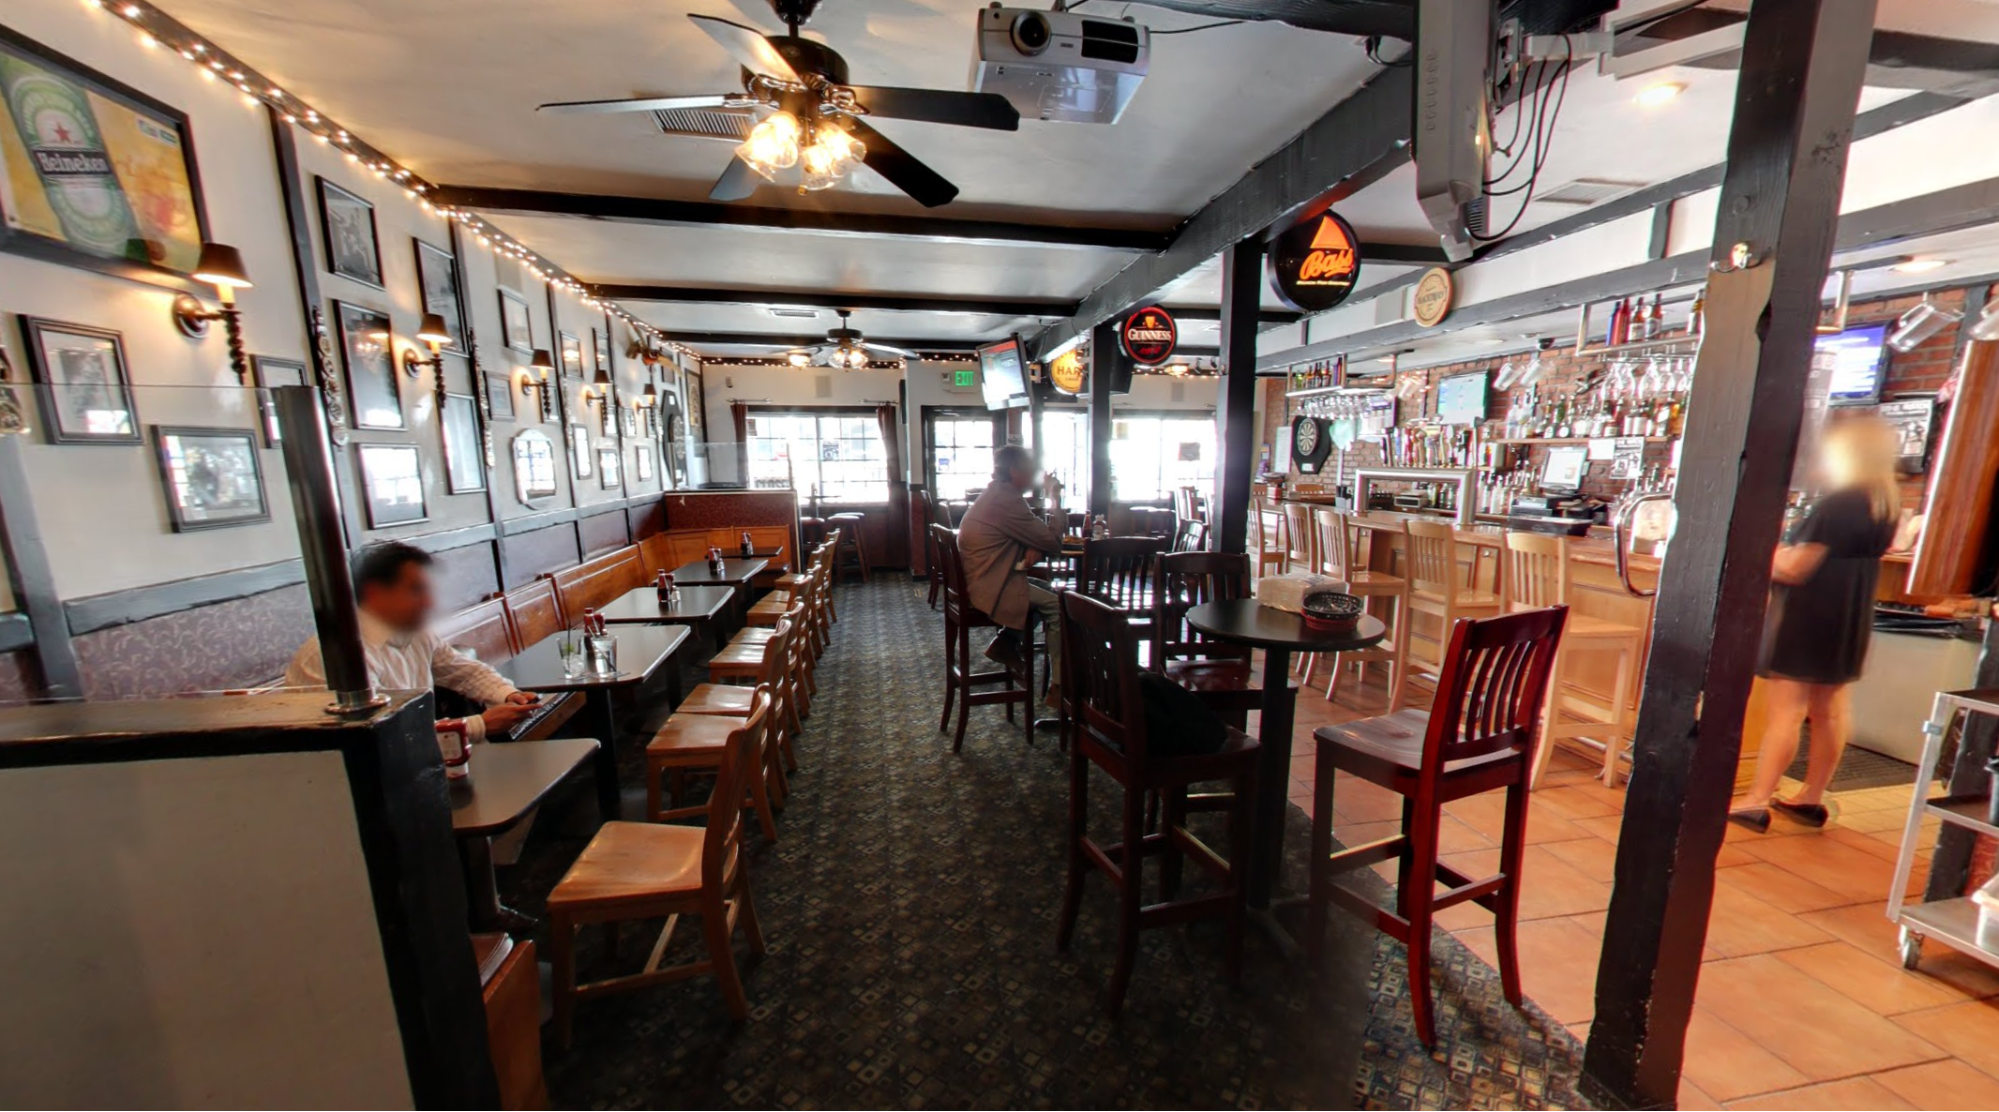 Pickwick’s Pub in Woodland Hills, California, offers free wifi and opens at 11 am every day.